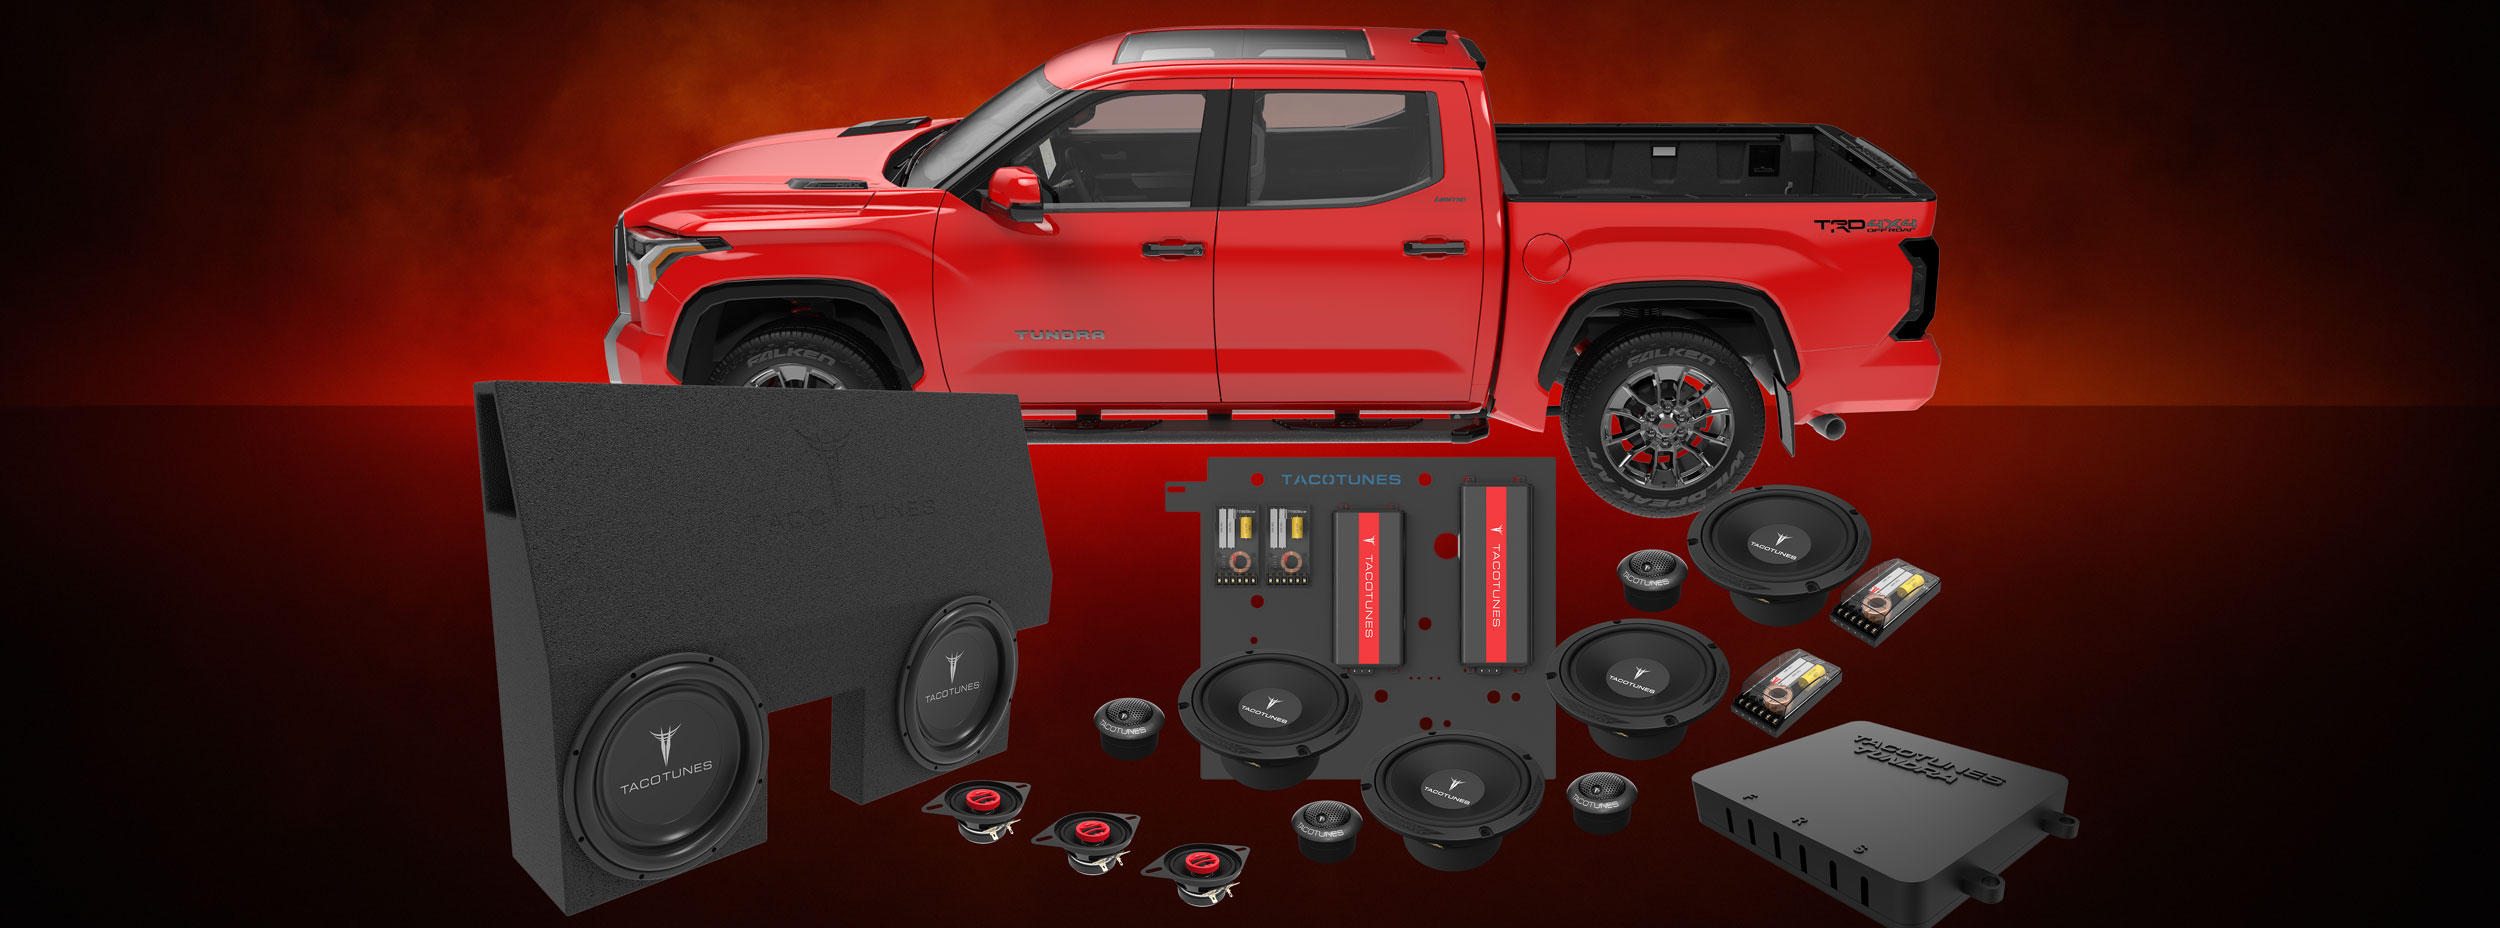 2022+ Toyota Tundra Complete Audio System1B JBL Equipped